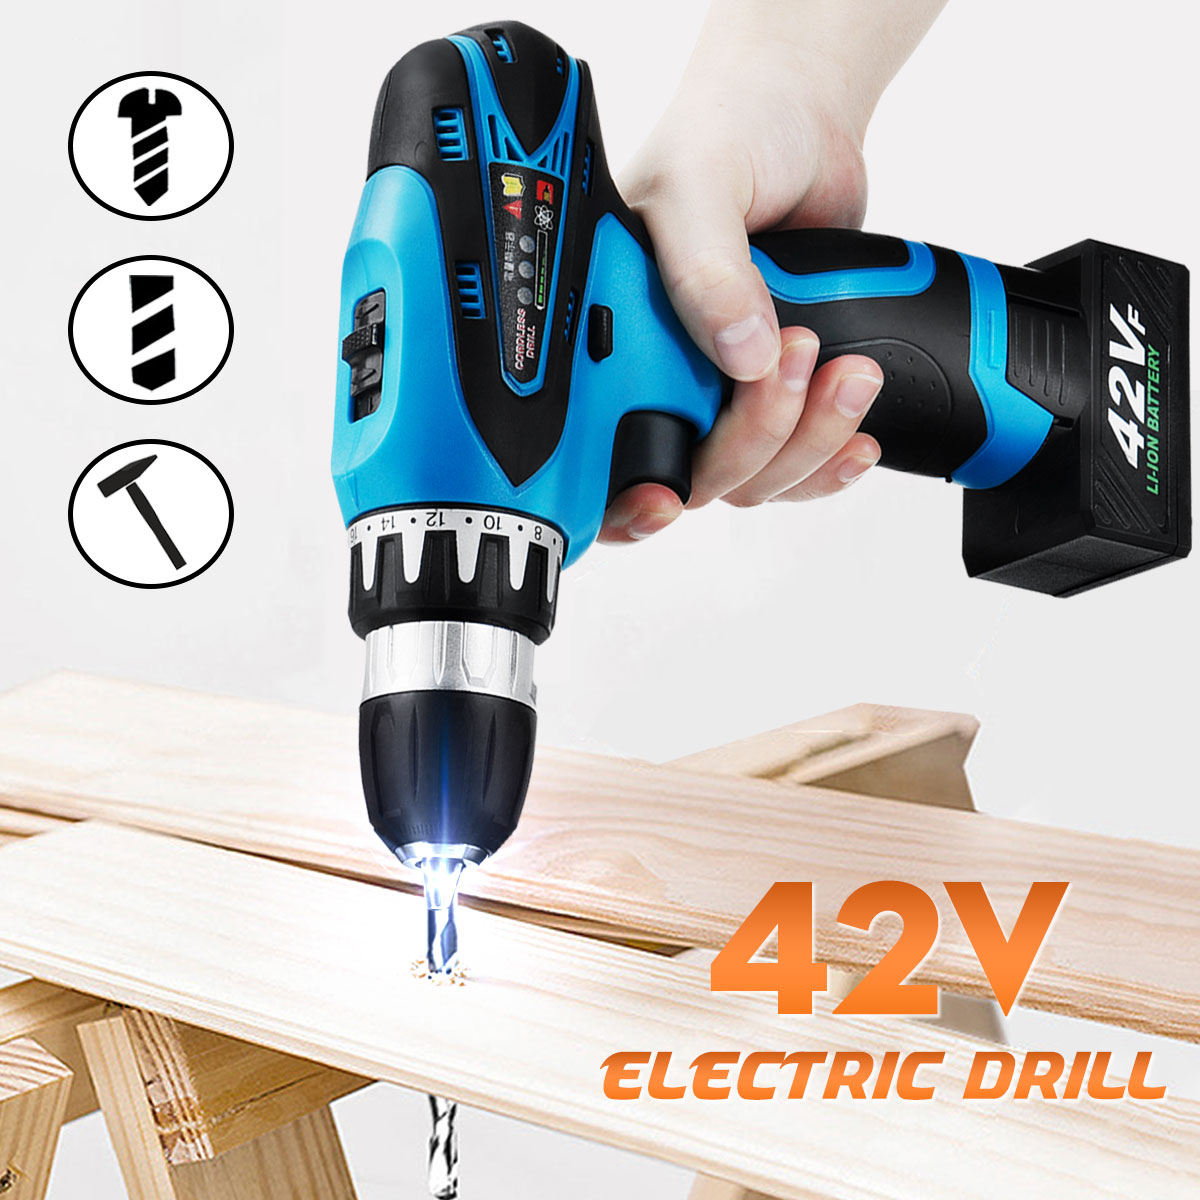 42V-9000mAh-Electric-Cordless-Drill-Driver-LED-2-Speed-Screwdriver-W-1-or-2-Li-Ion-Battery-1451594-1